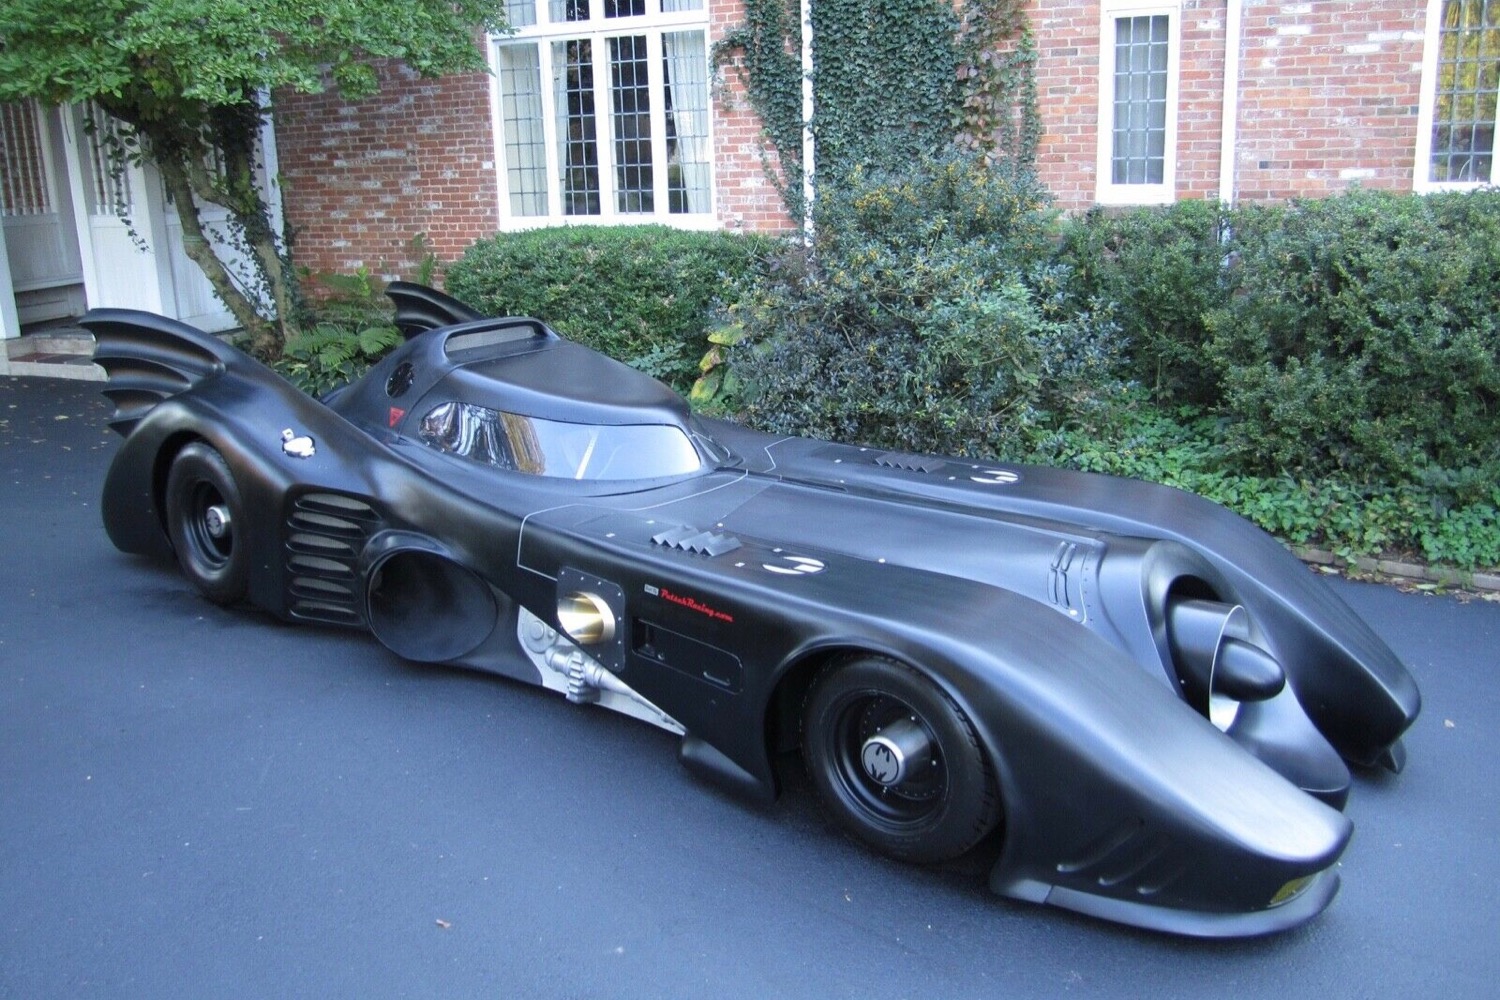 The Batmobile EV is real — and you can actually buy one